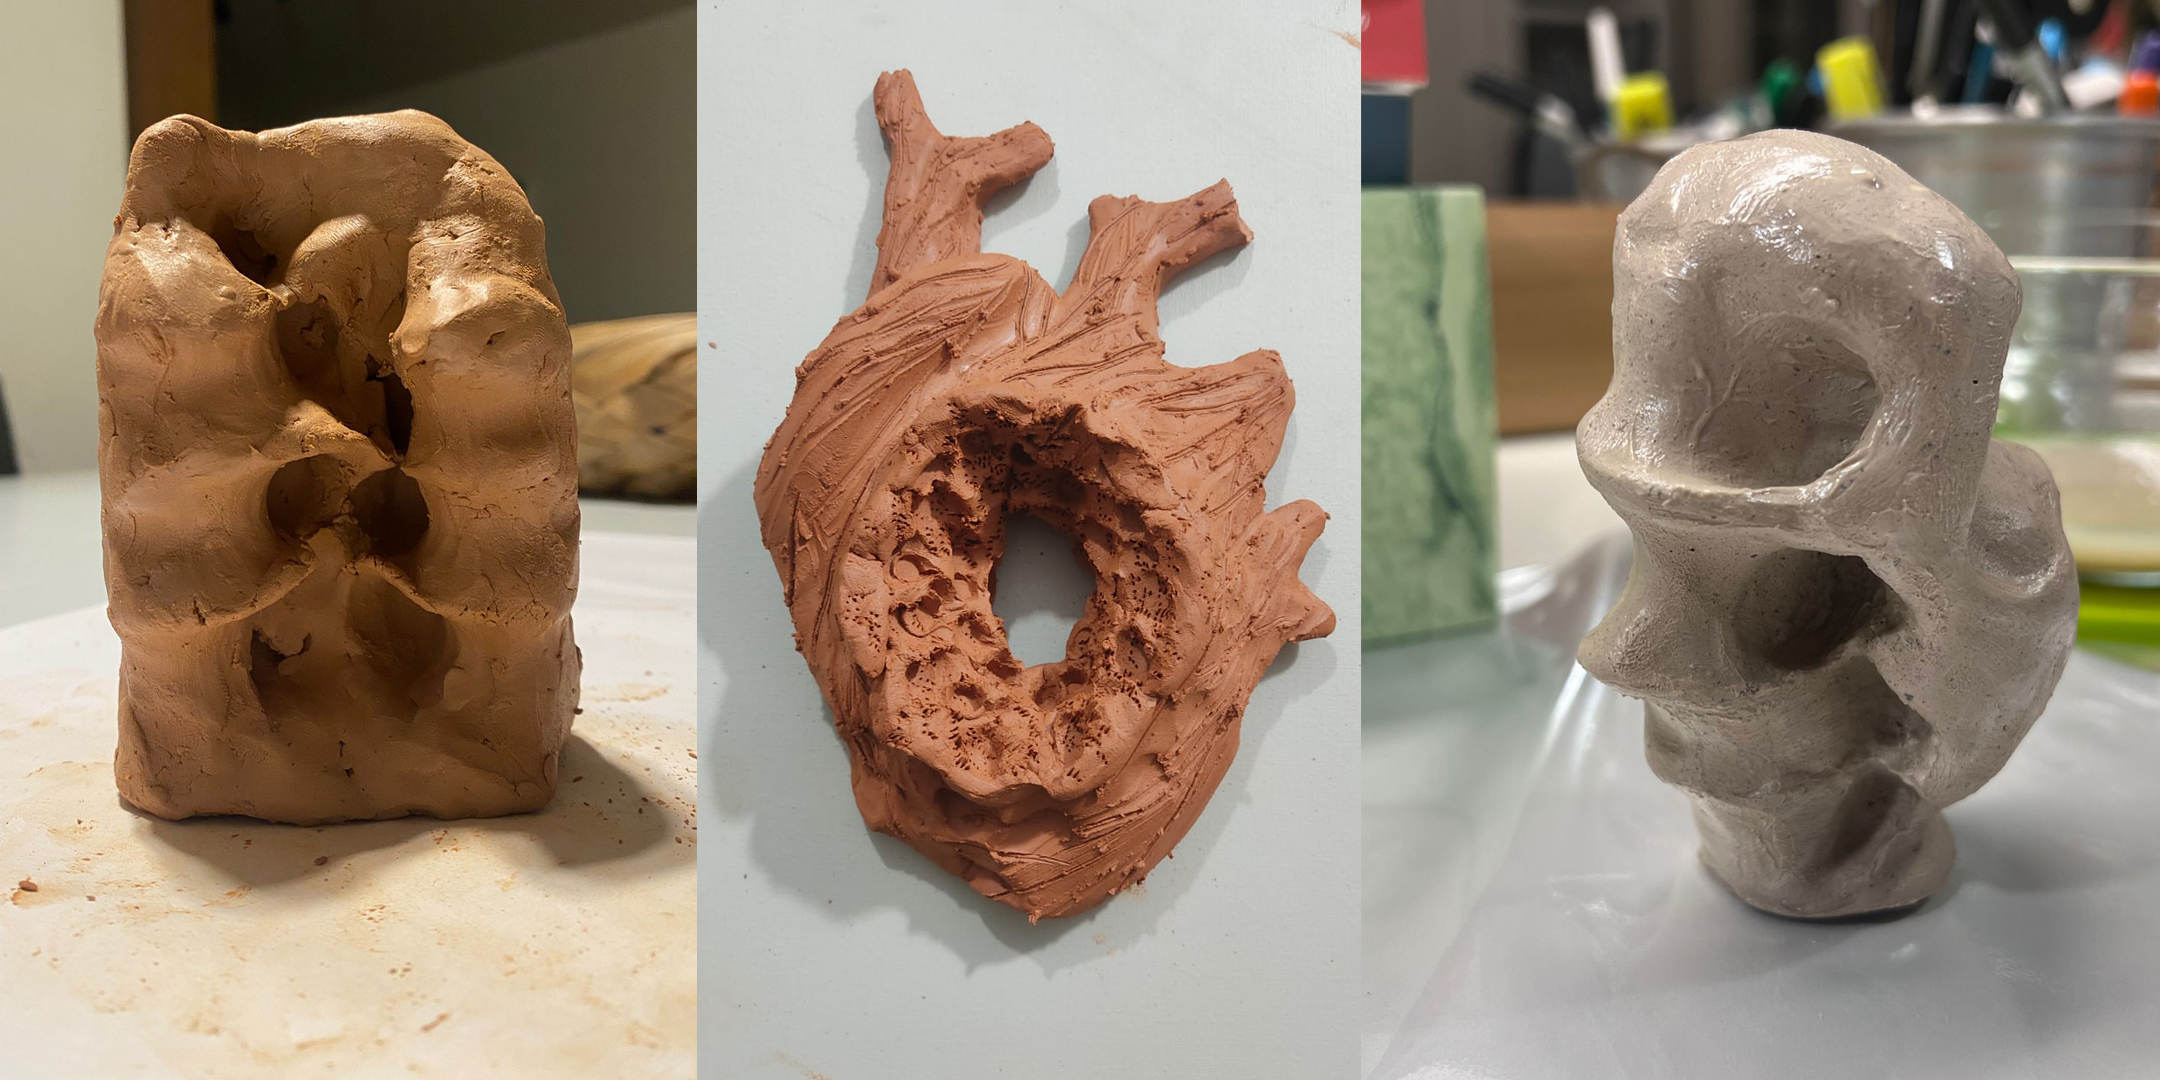 Create from a word with Clay - Workshop with Priscila Soares